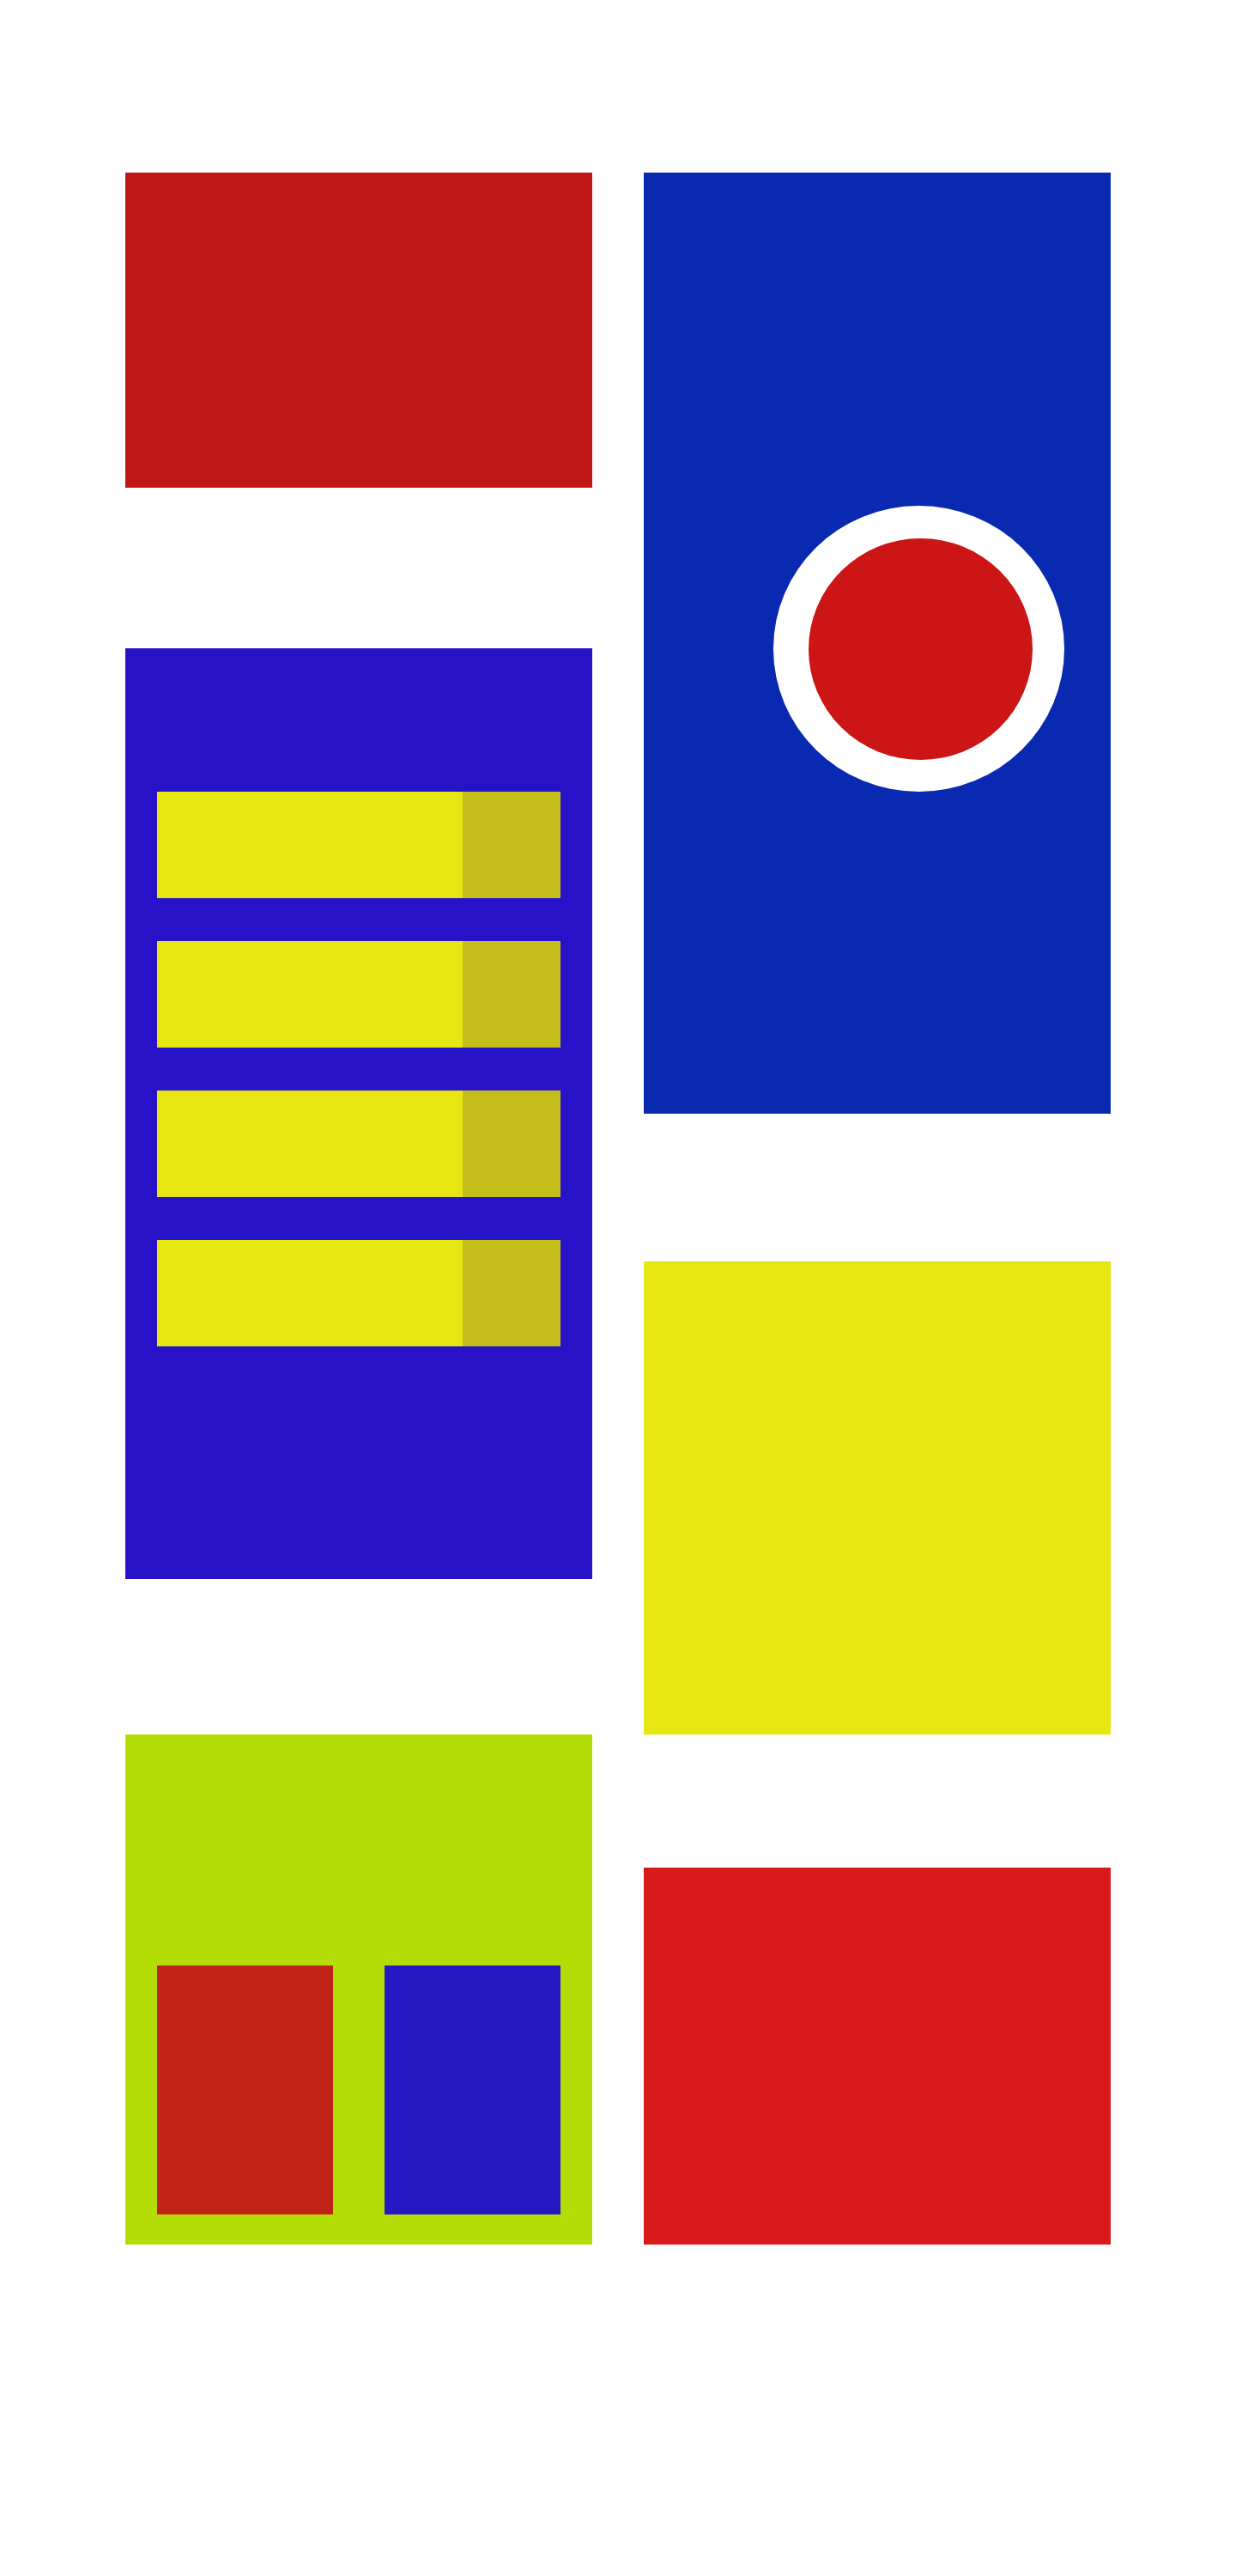 yellow, blue, red and rectangles